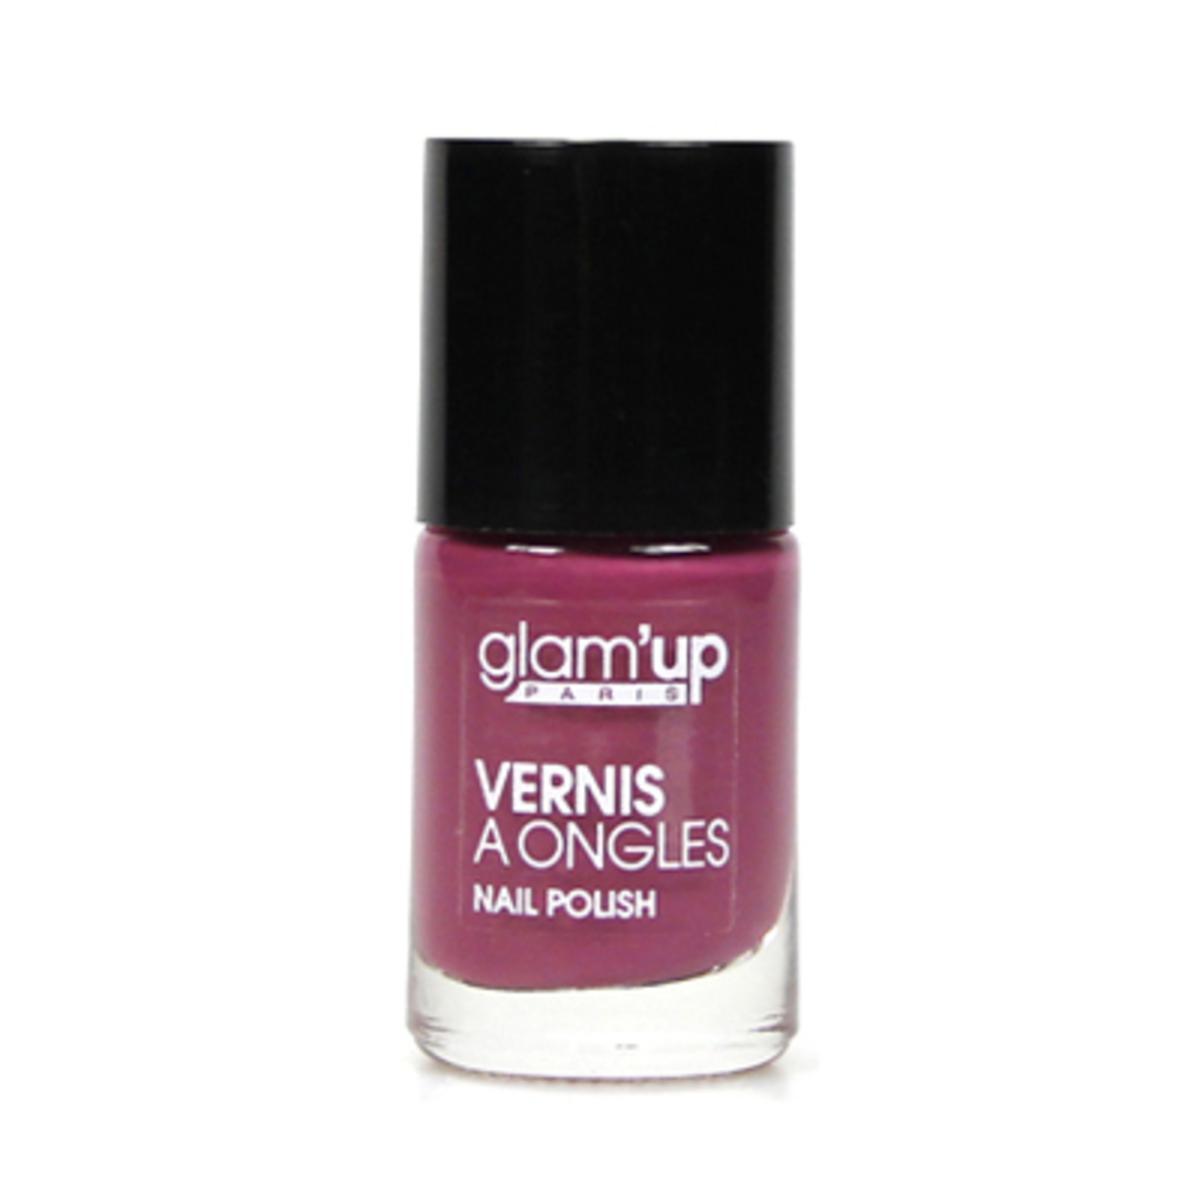 Vernis à ongles Glam'Up pampolona